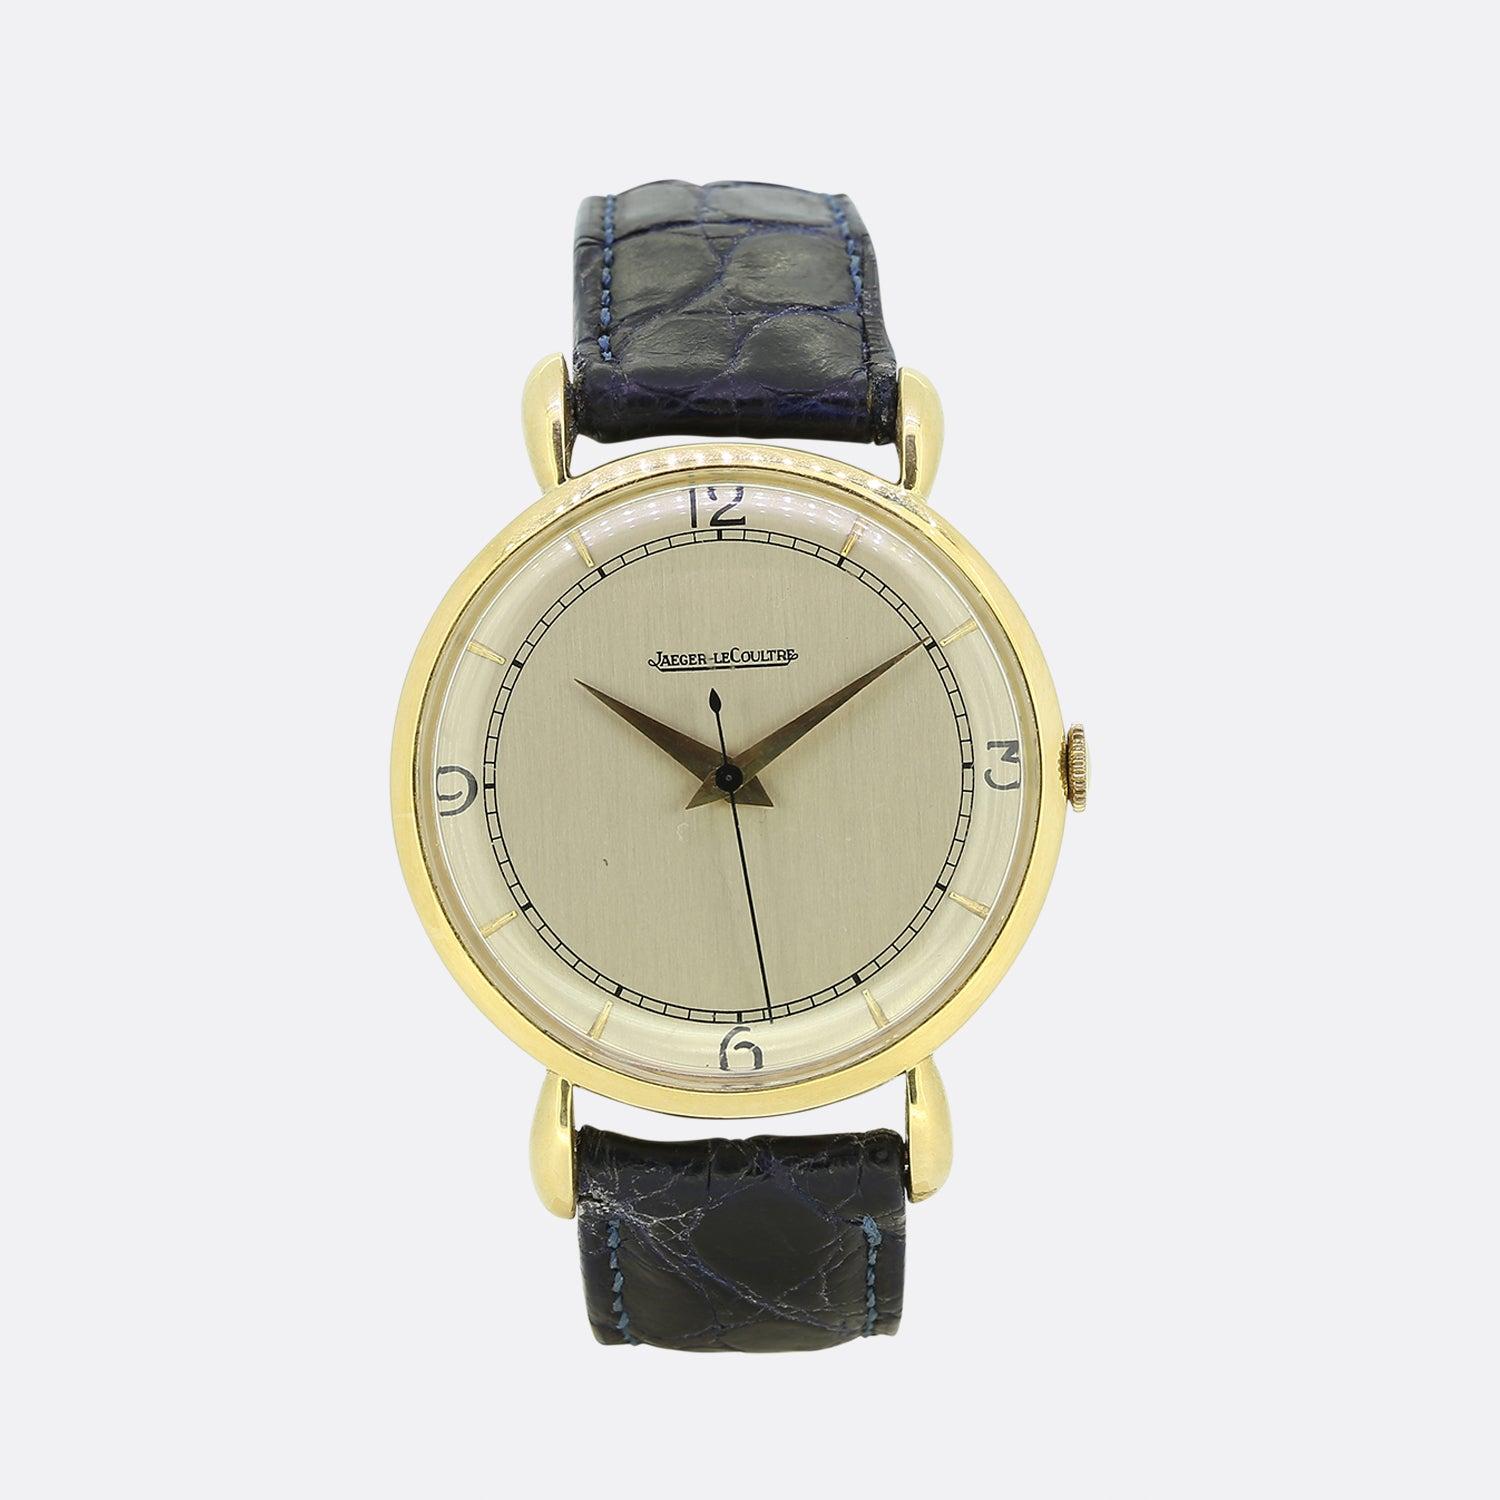 This is a delightful vintage Jaeger-Le Coultre wristwatch from the 1950s. This piece features a circular face with a cream coloured dial, gold hour markers and gold hands. Yet its most notable characteristics include its fancy teardrop lugs and